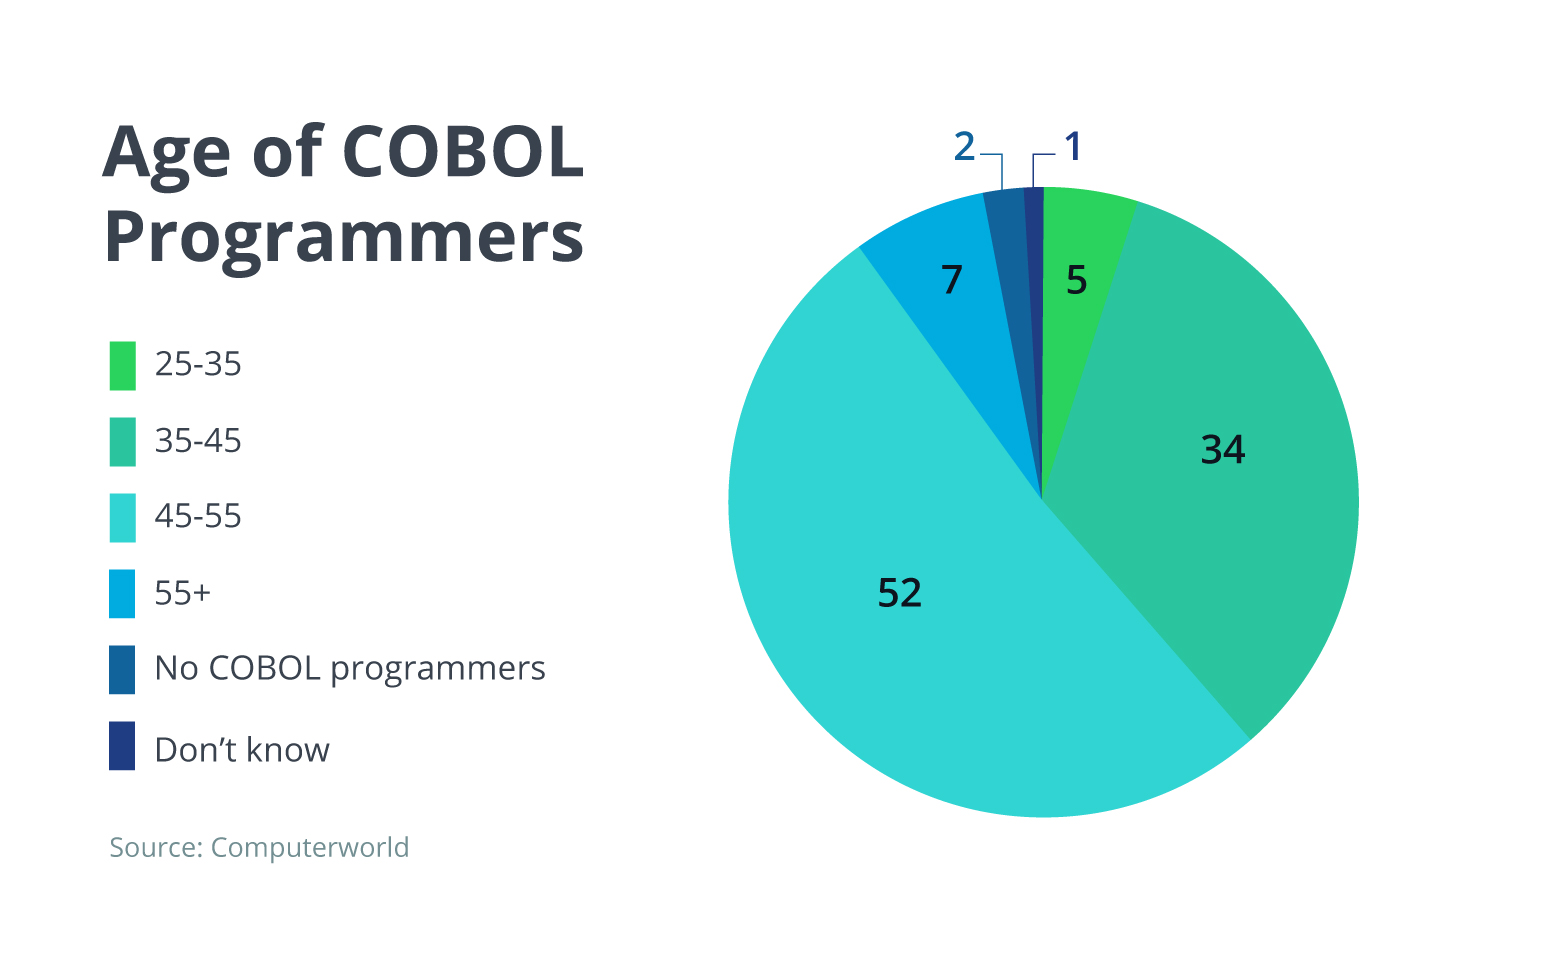 Pie-chart on age distribution of COBOL programmers, based on data from ComputerWorld